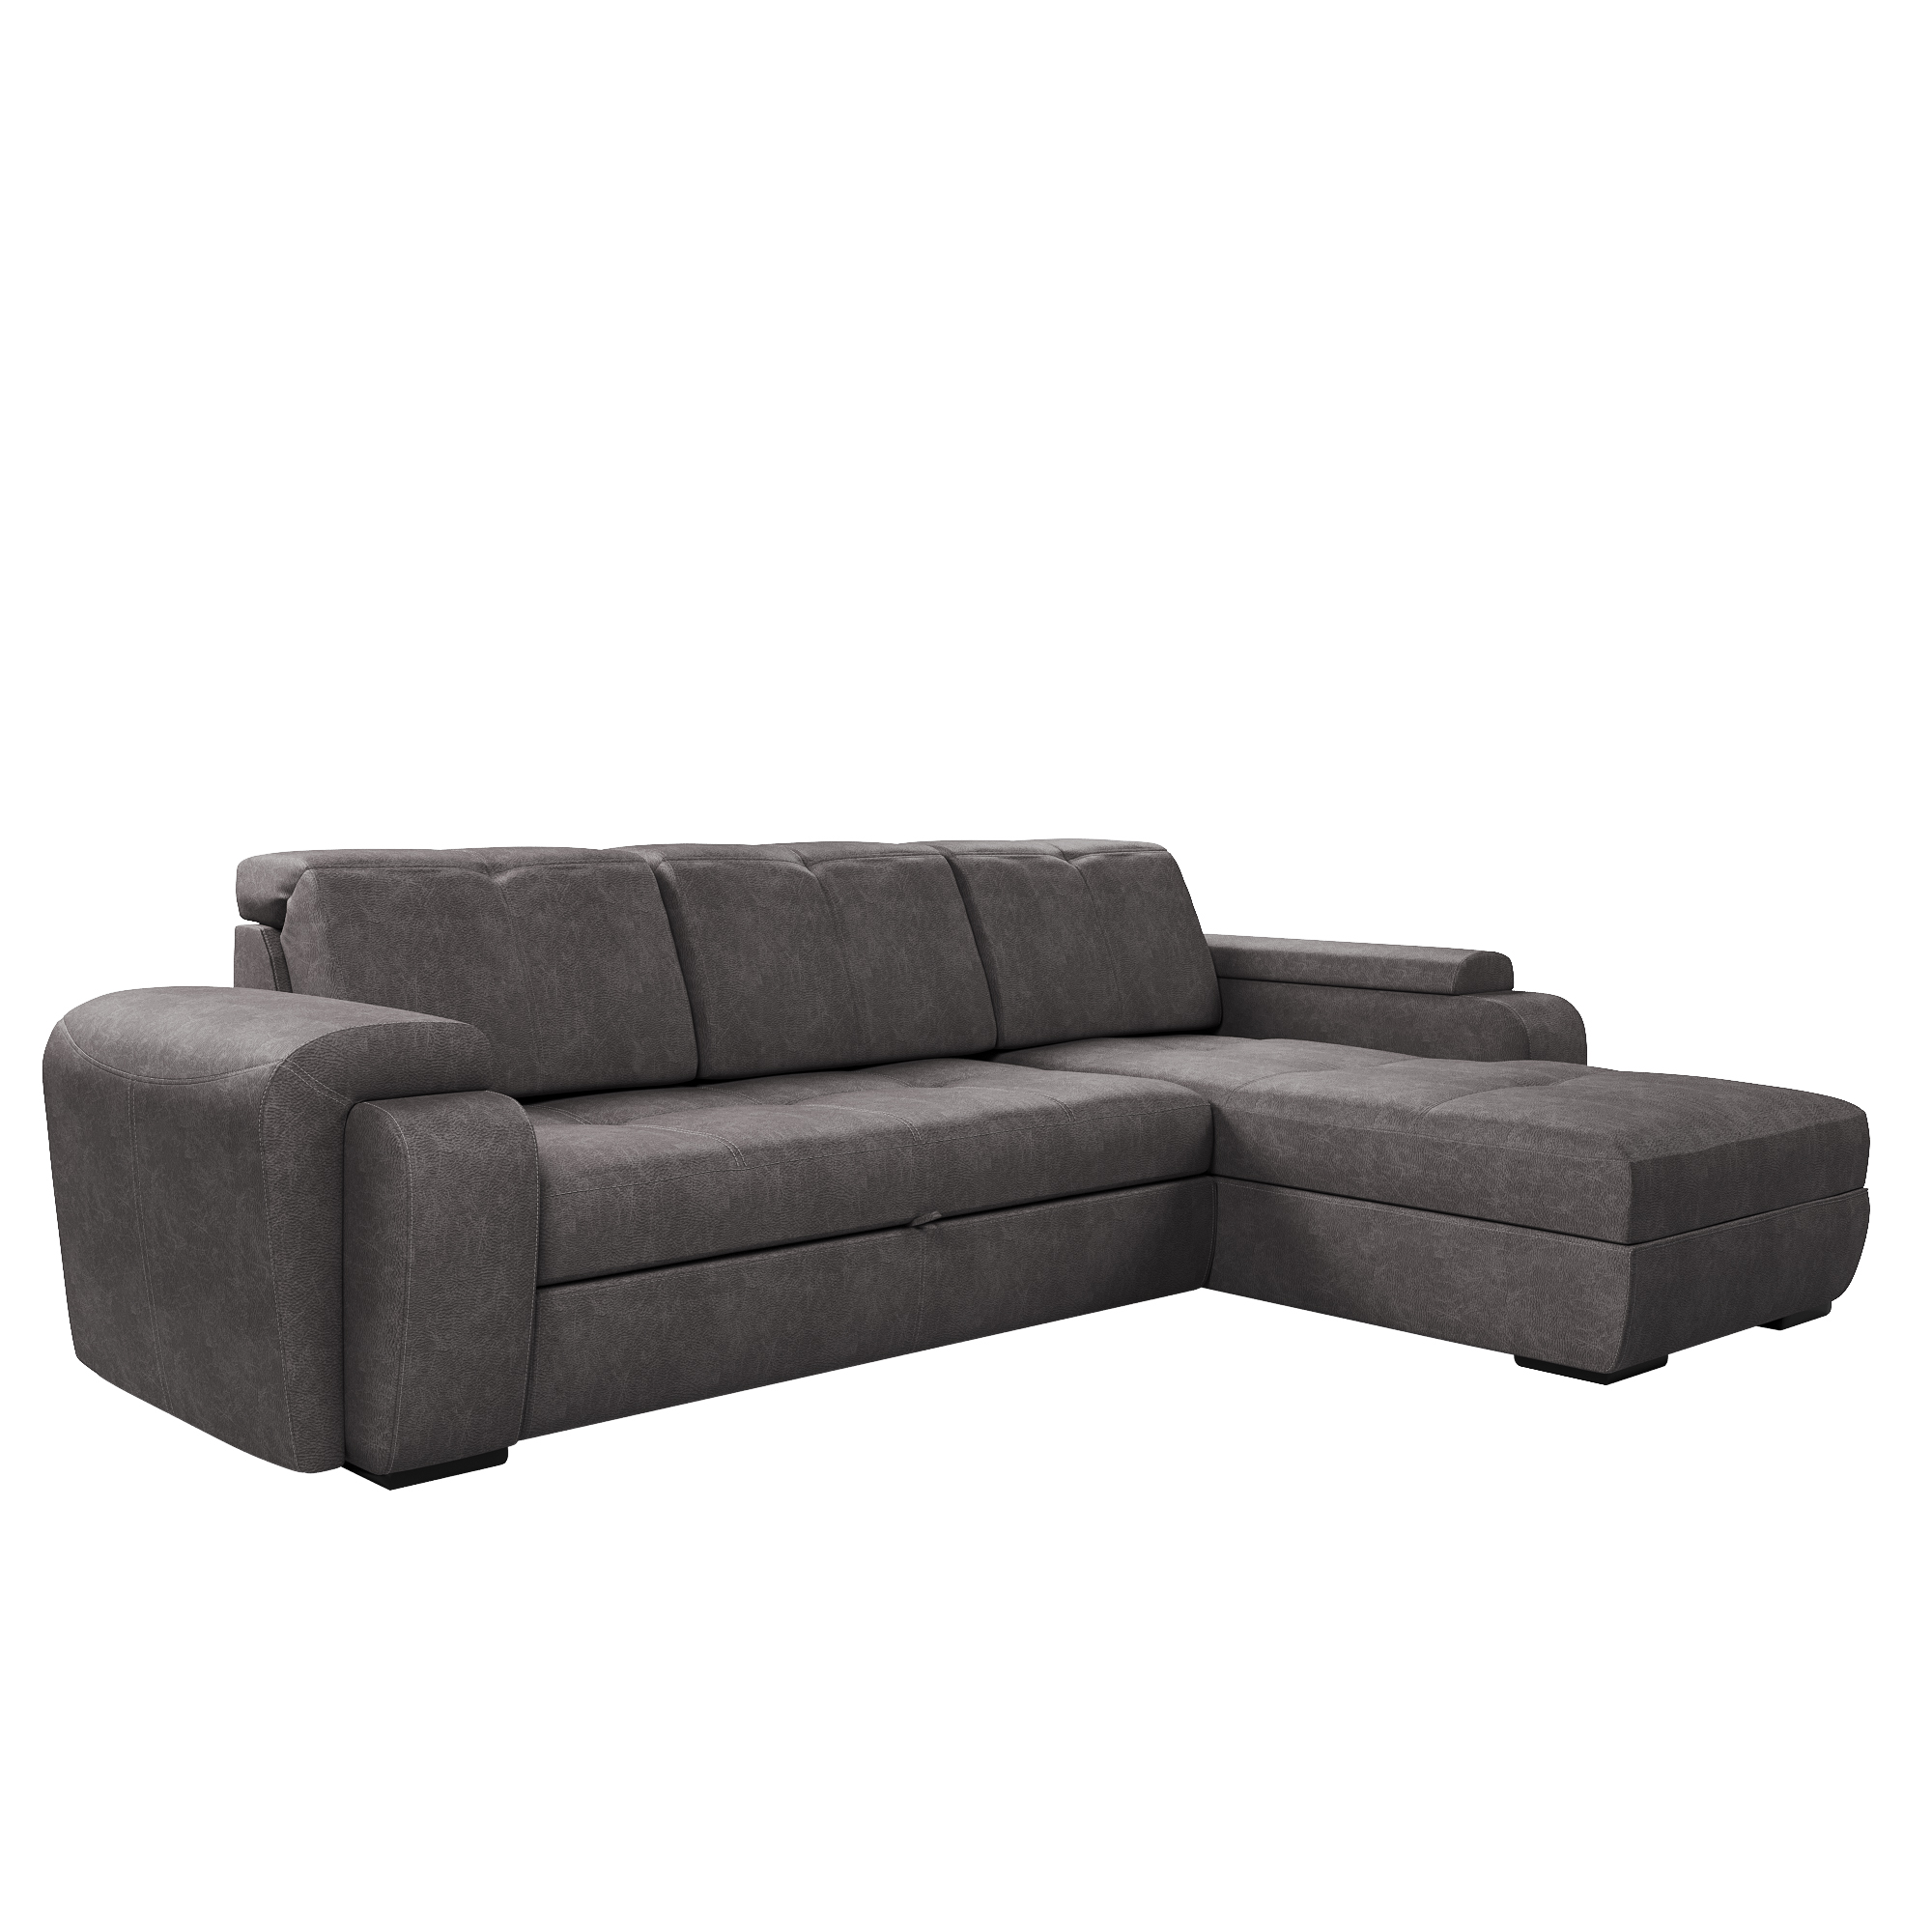 Zander 2 piece Chaise Sectional